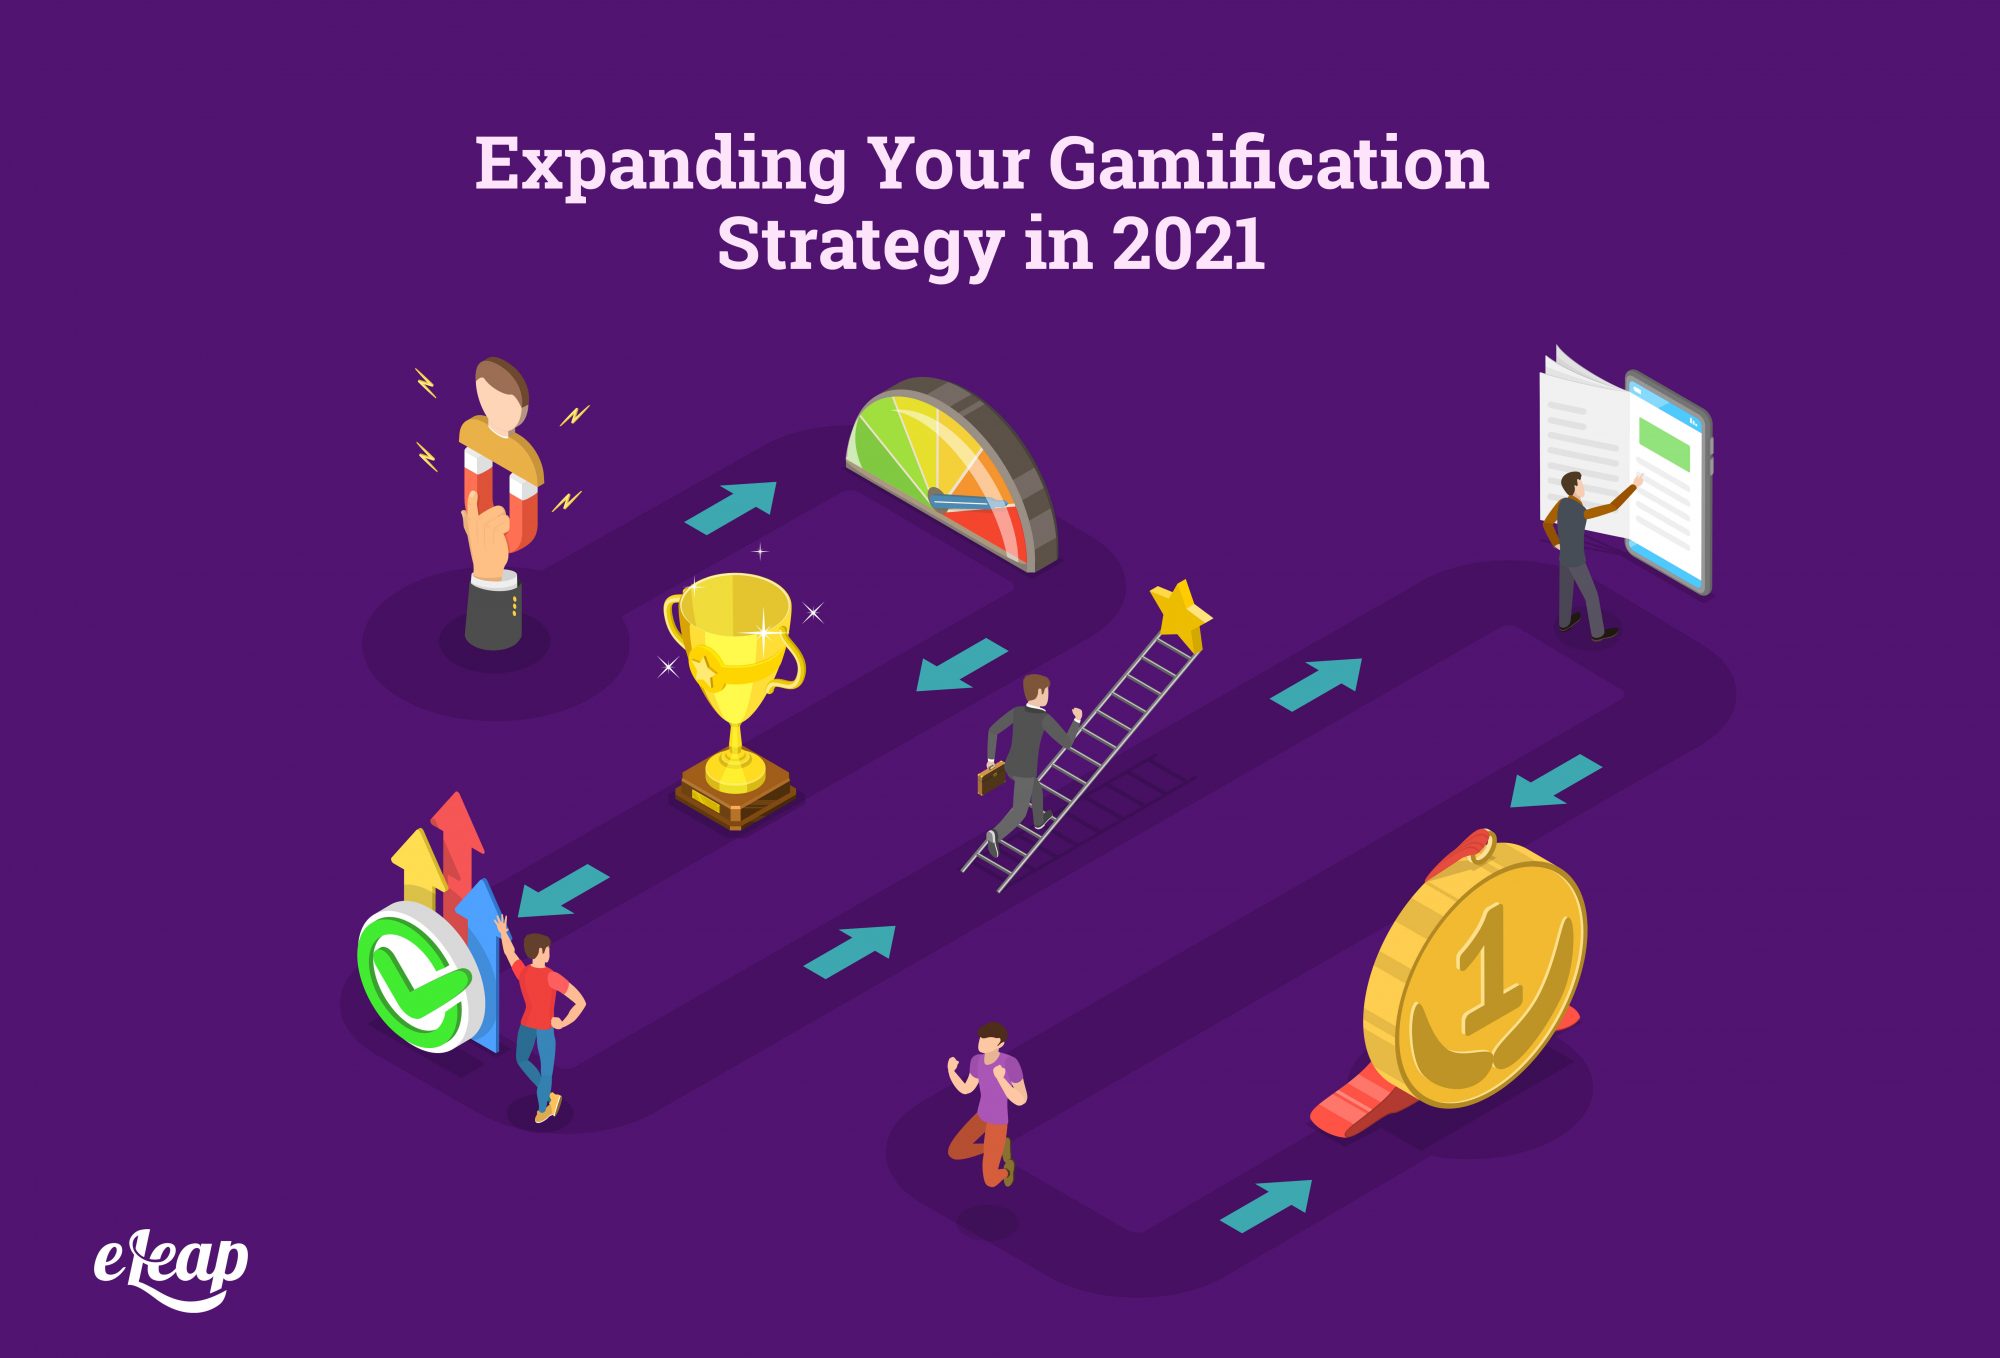 Expanding Your Gamification Strategy in 2021